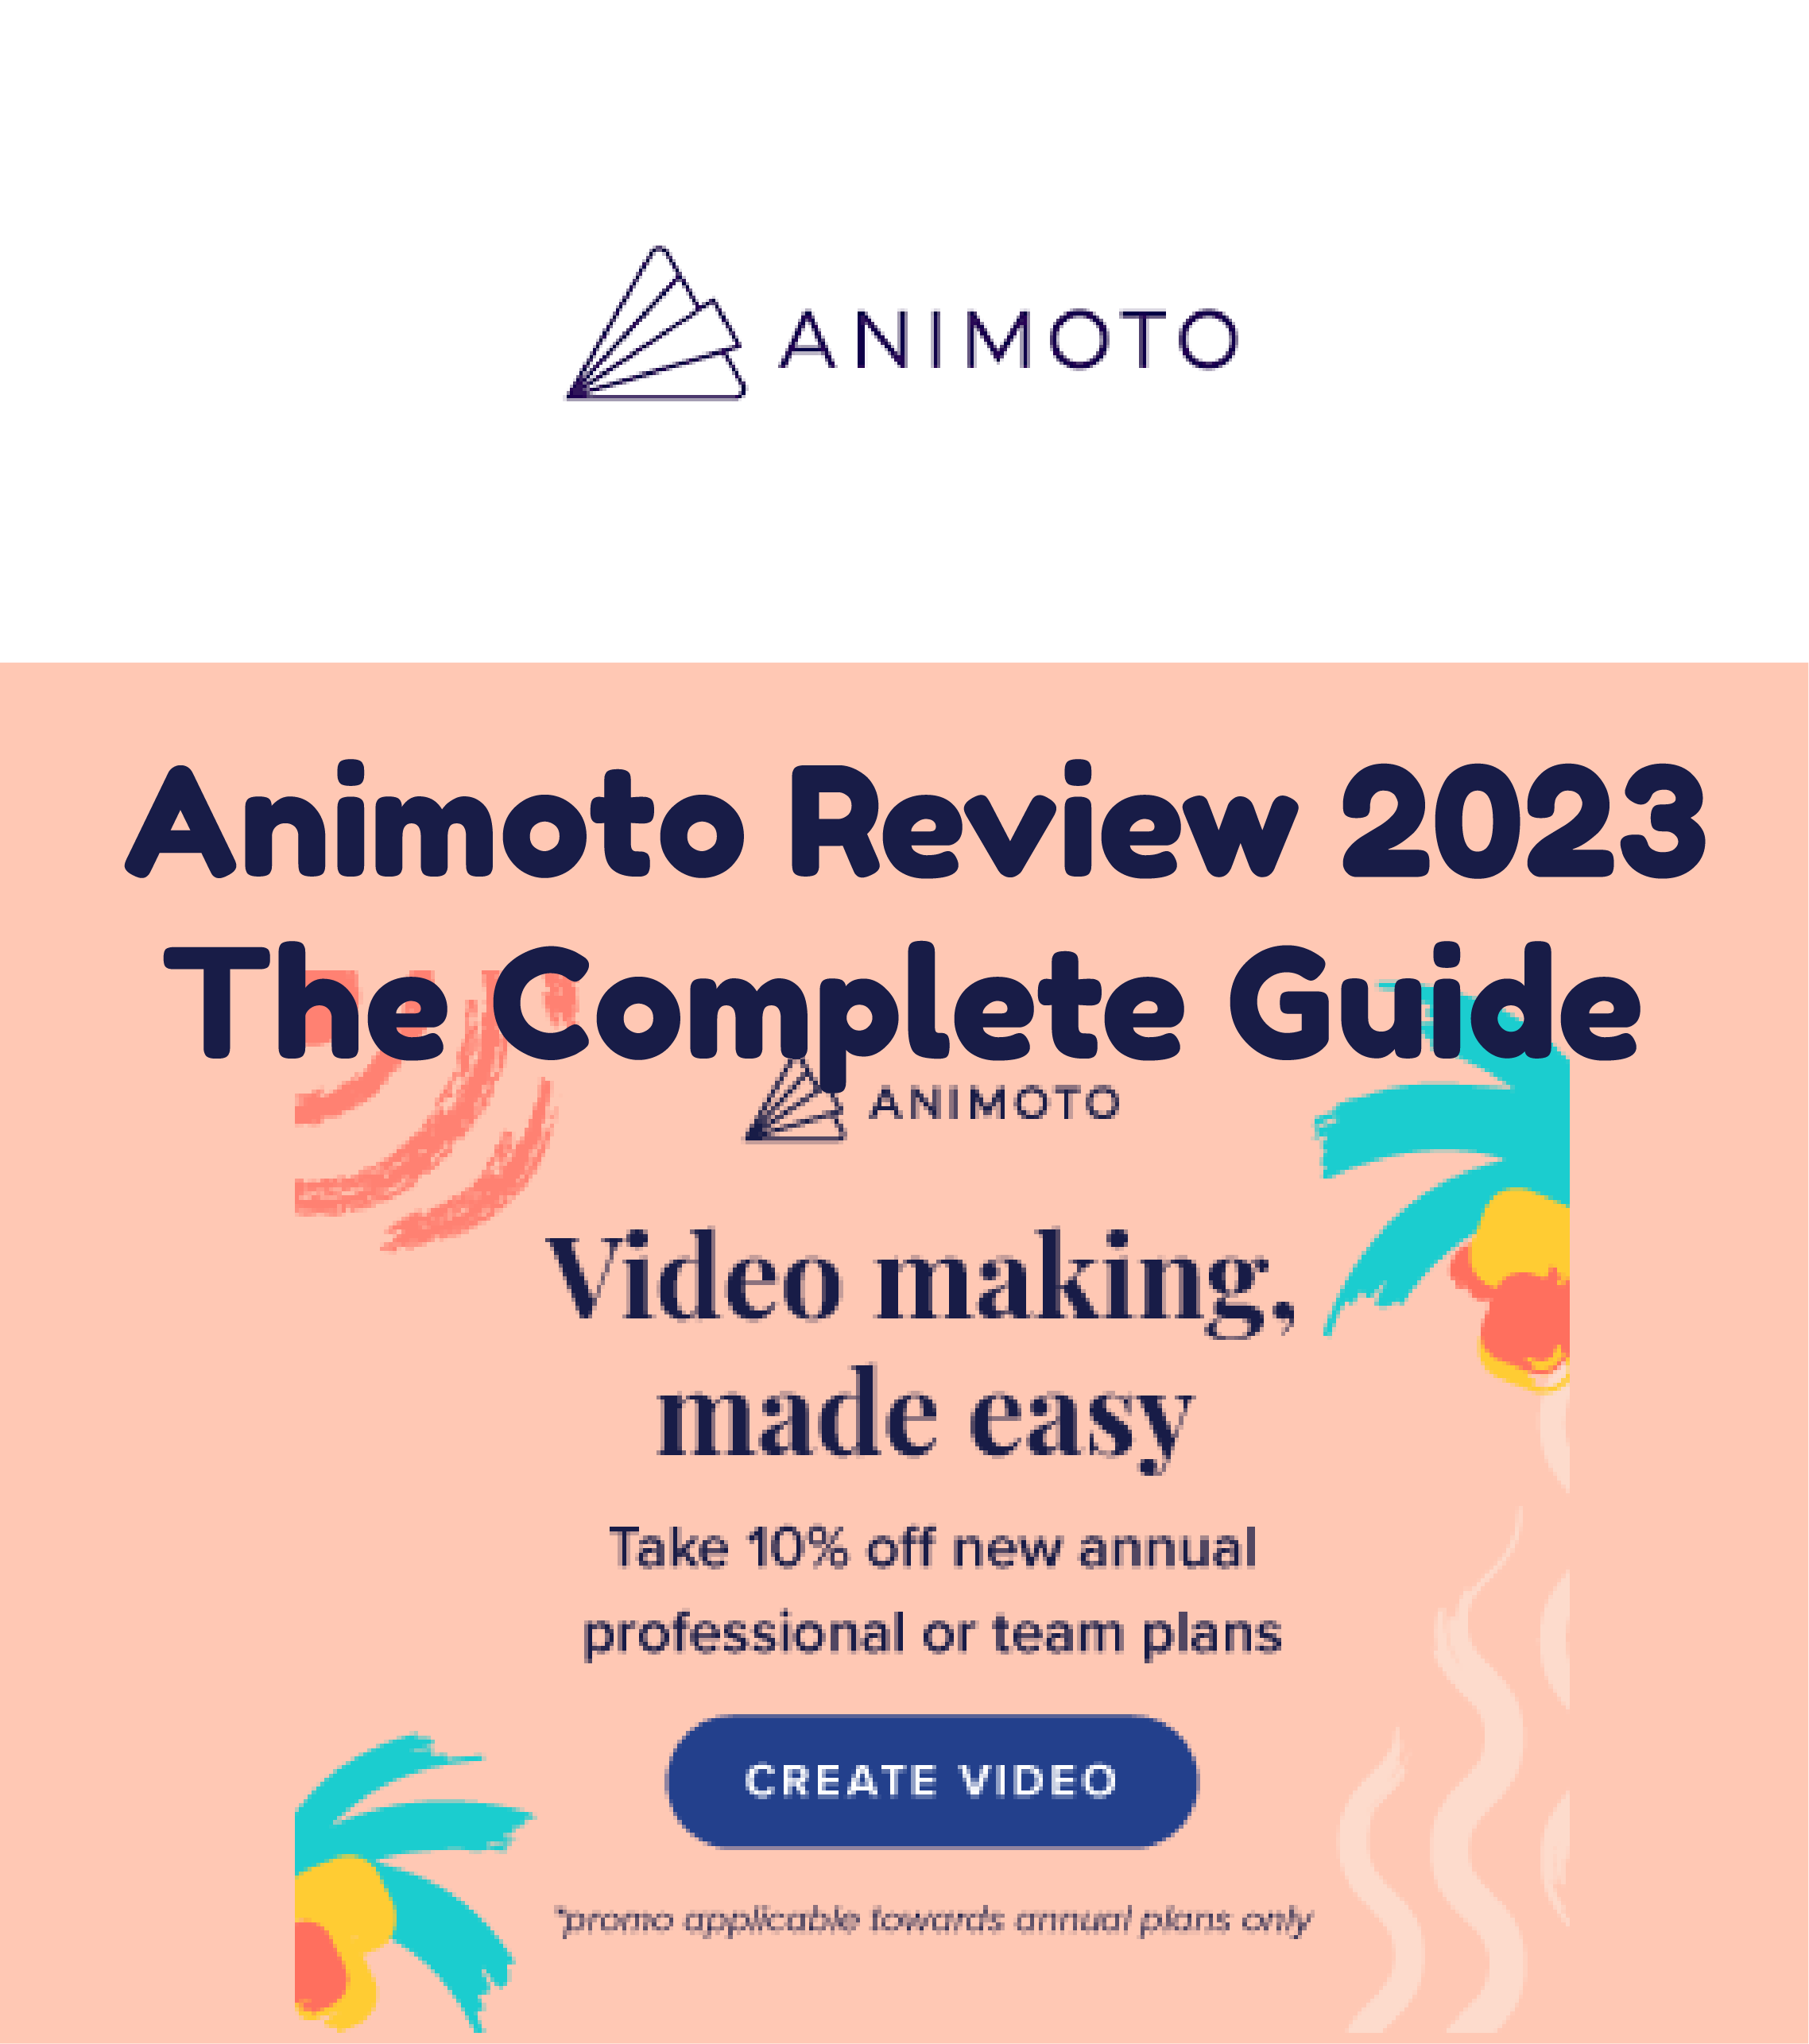 Animoto Review 2023: The Complete Guide